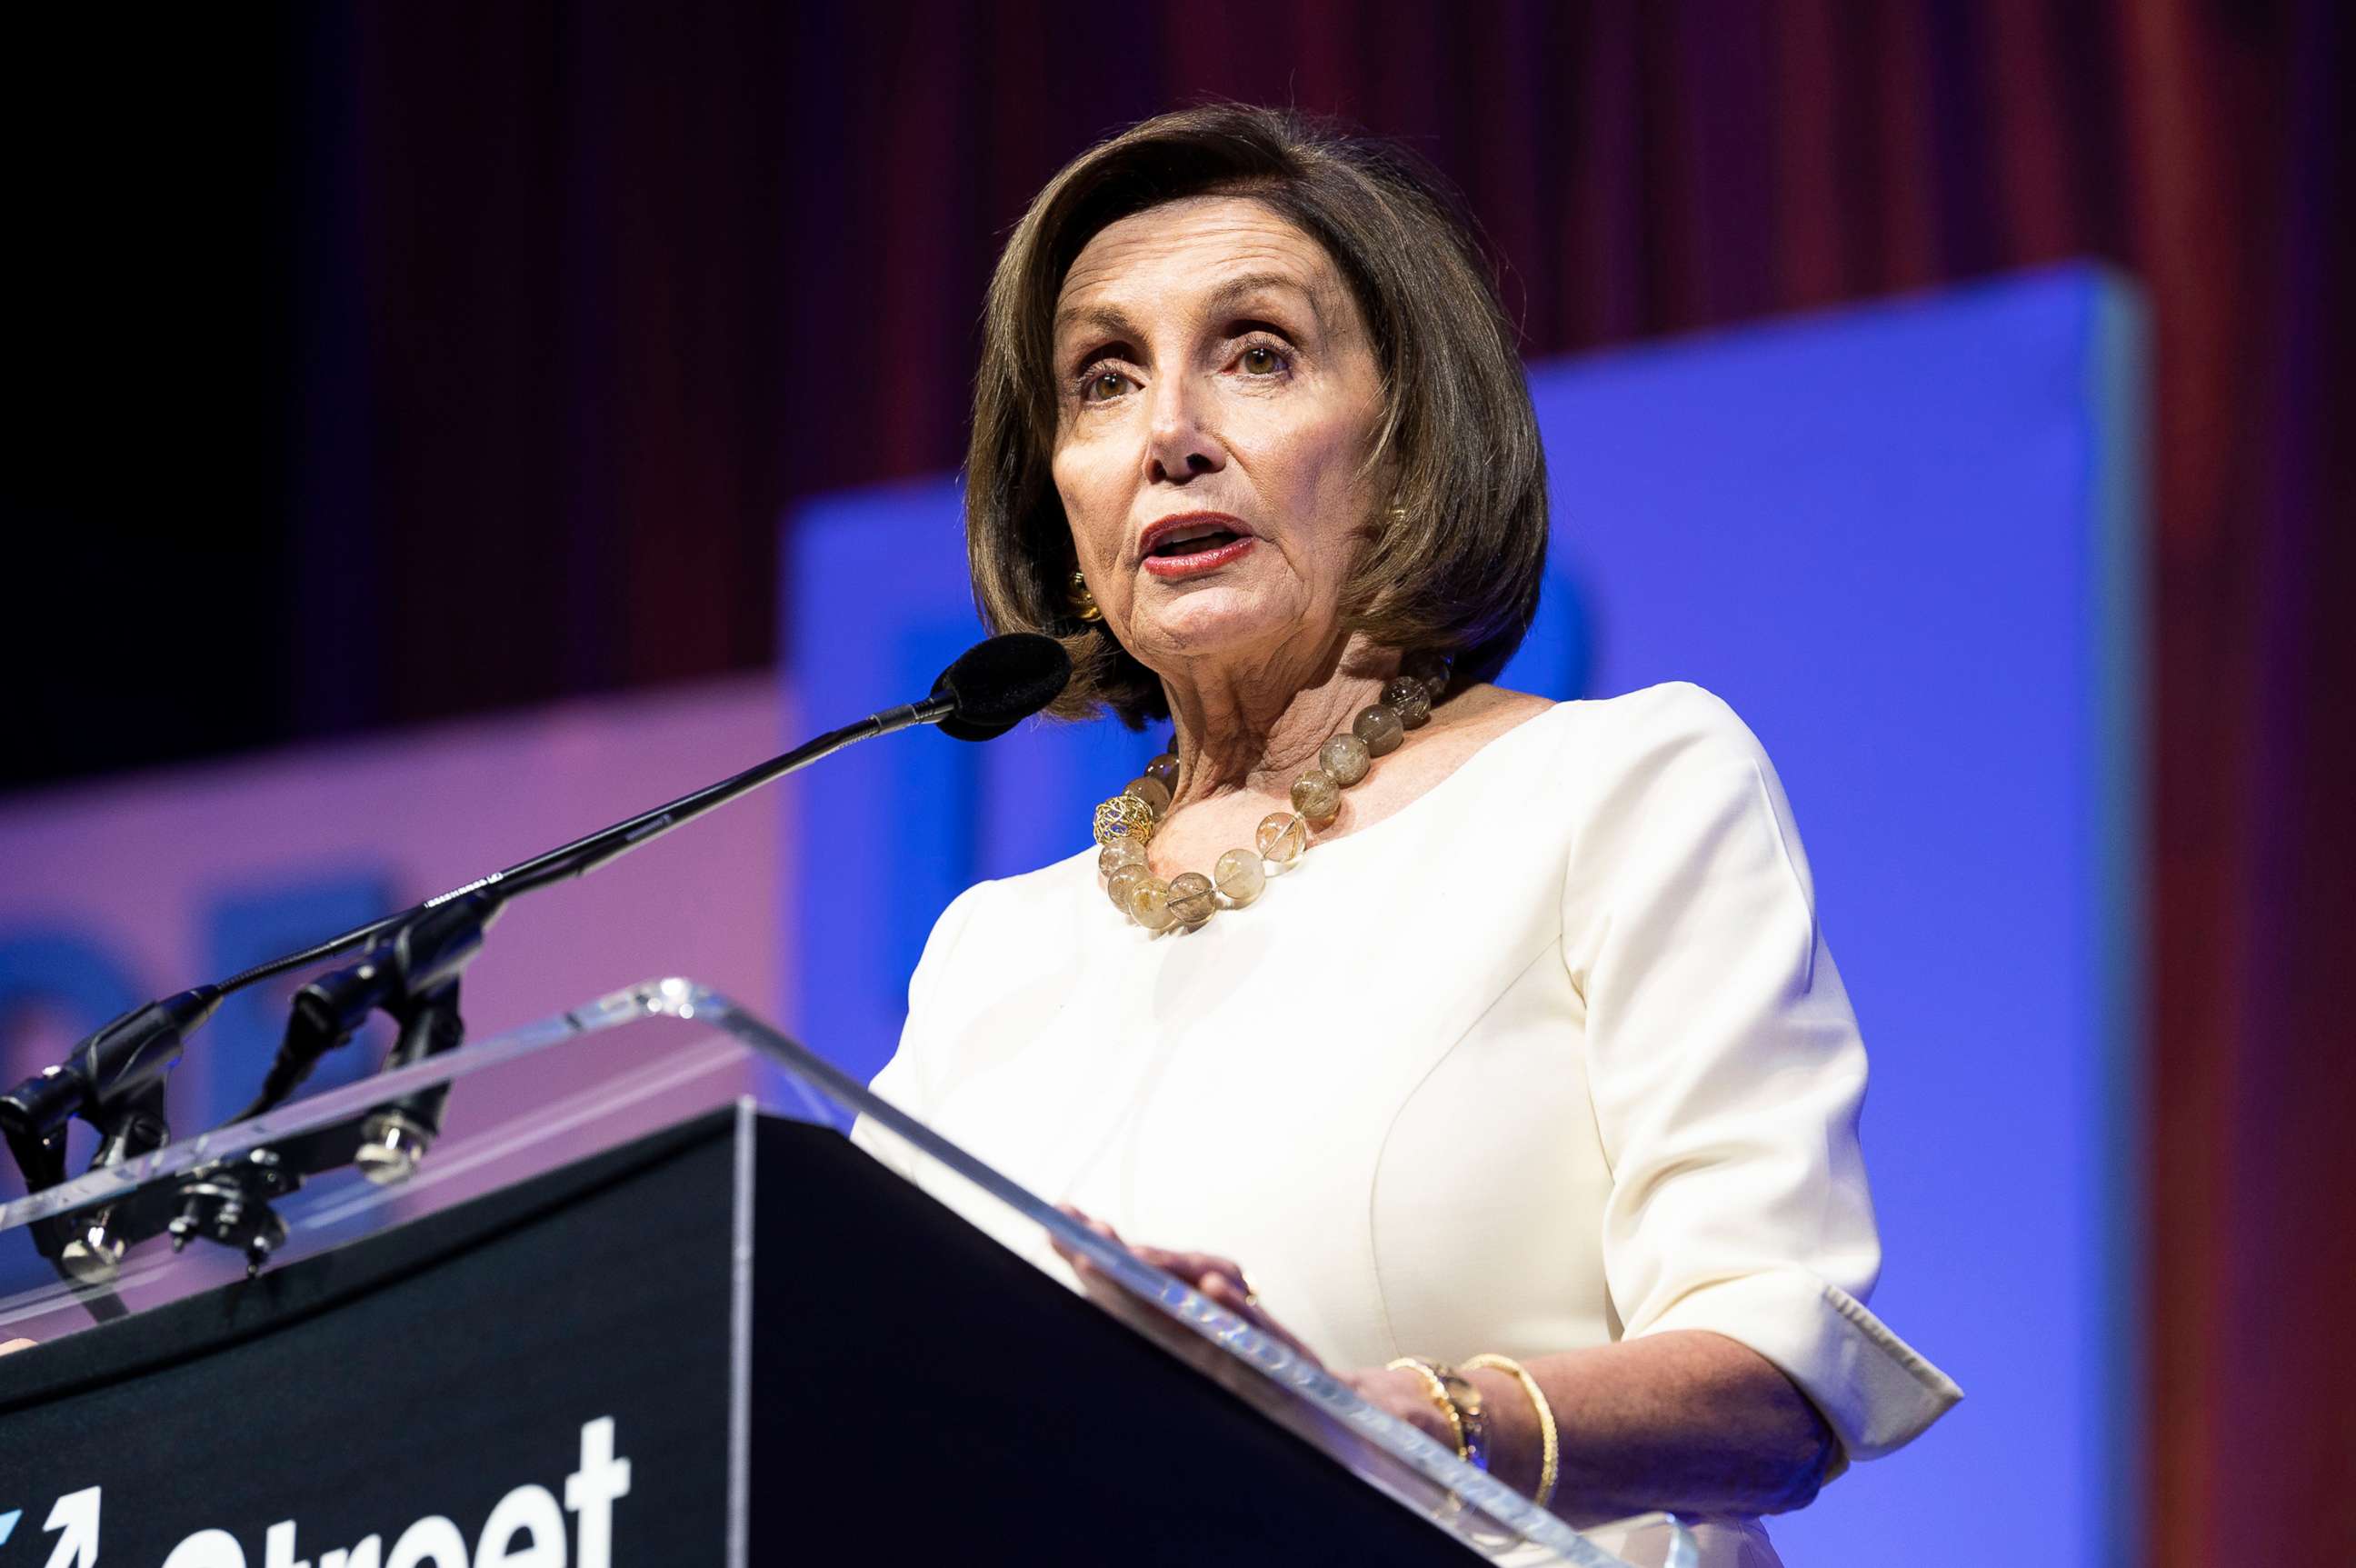 PHOTO: Nancy Pelosi, Speaker of the U.S. House of Representatives, is shown speaking at the J Street National Conference at the Walter E. Washington Convention Center in Washington, D.C., Oct. 28, 2019.